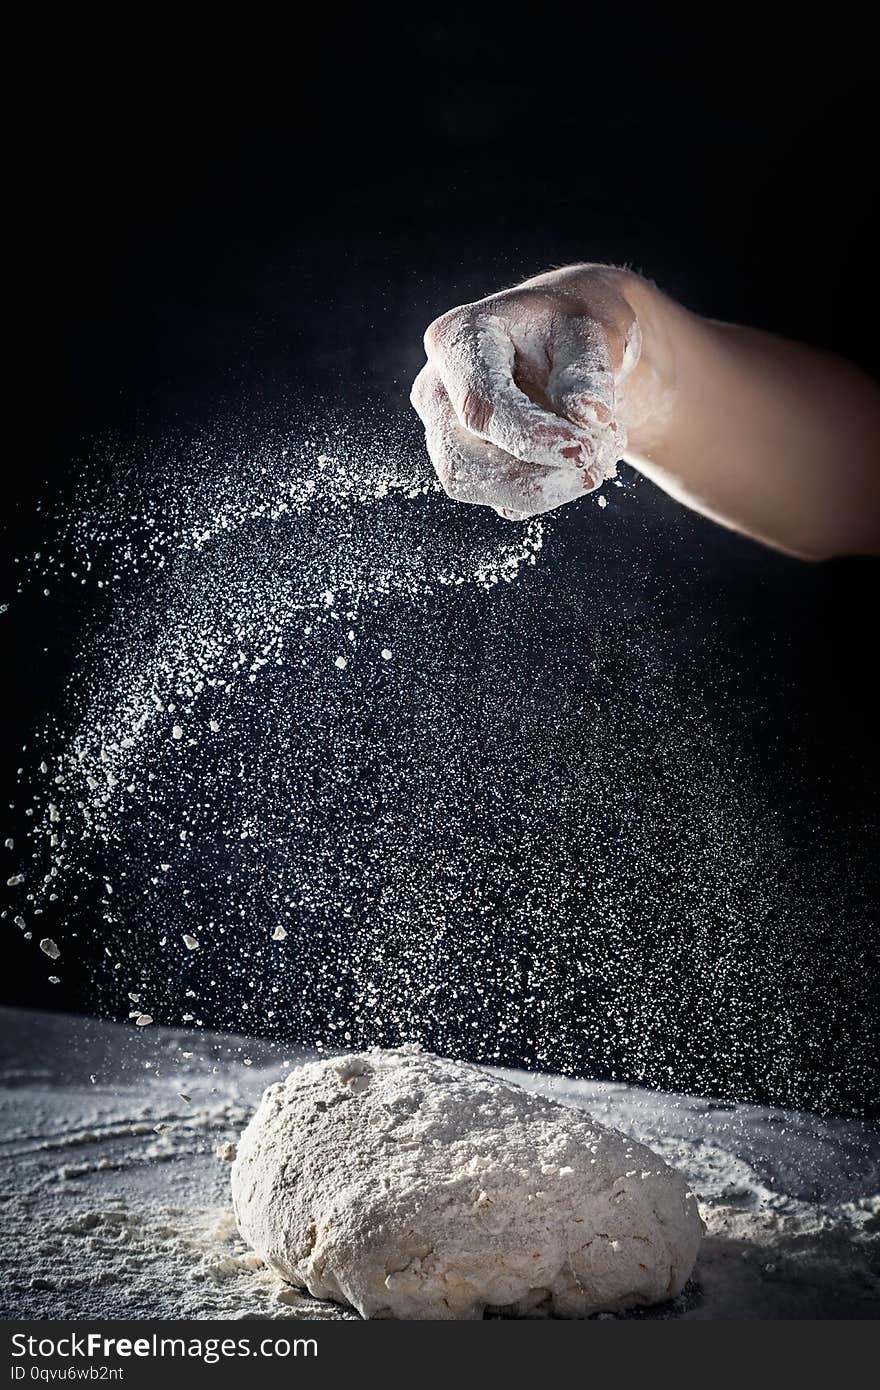 Chef prepares the dough with flour. male sprinkling flour over dough on table on dark background. Vertical. Copy space. Conceptn of flying food. Gluten free dough for pasta, bakery or pizza